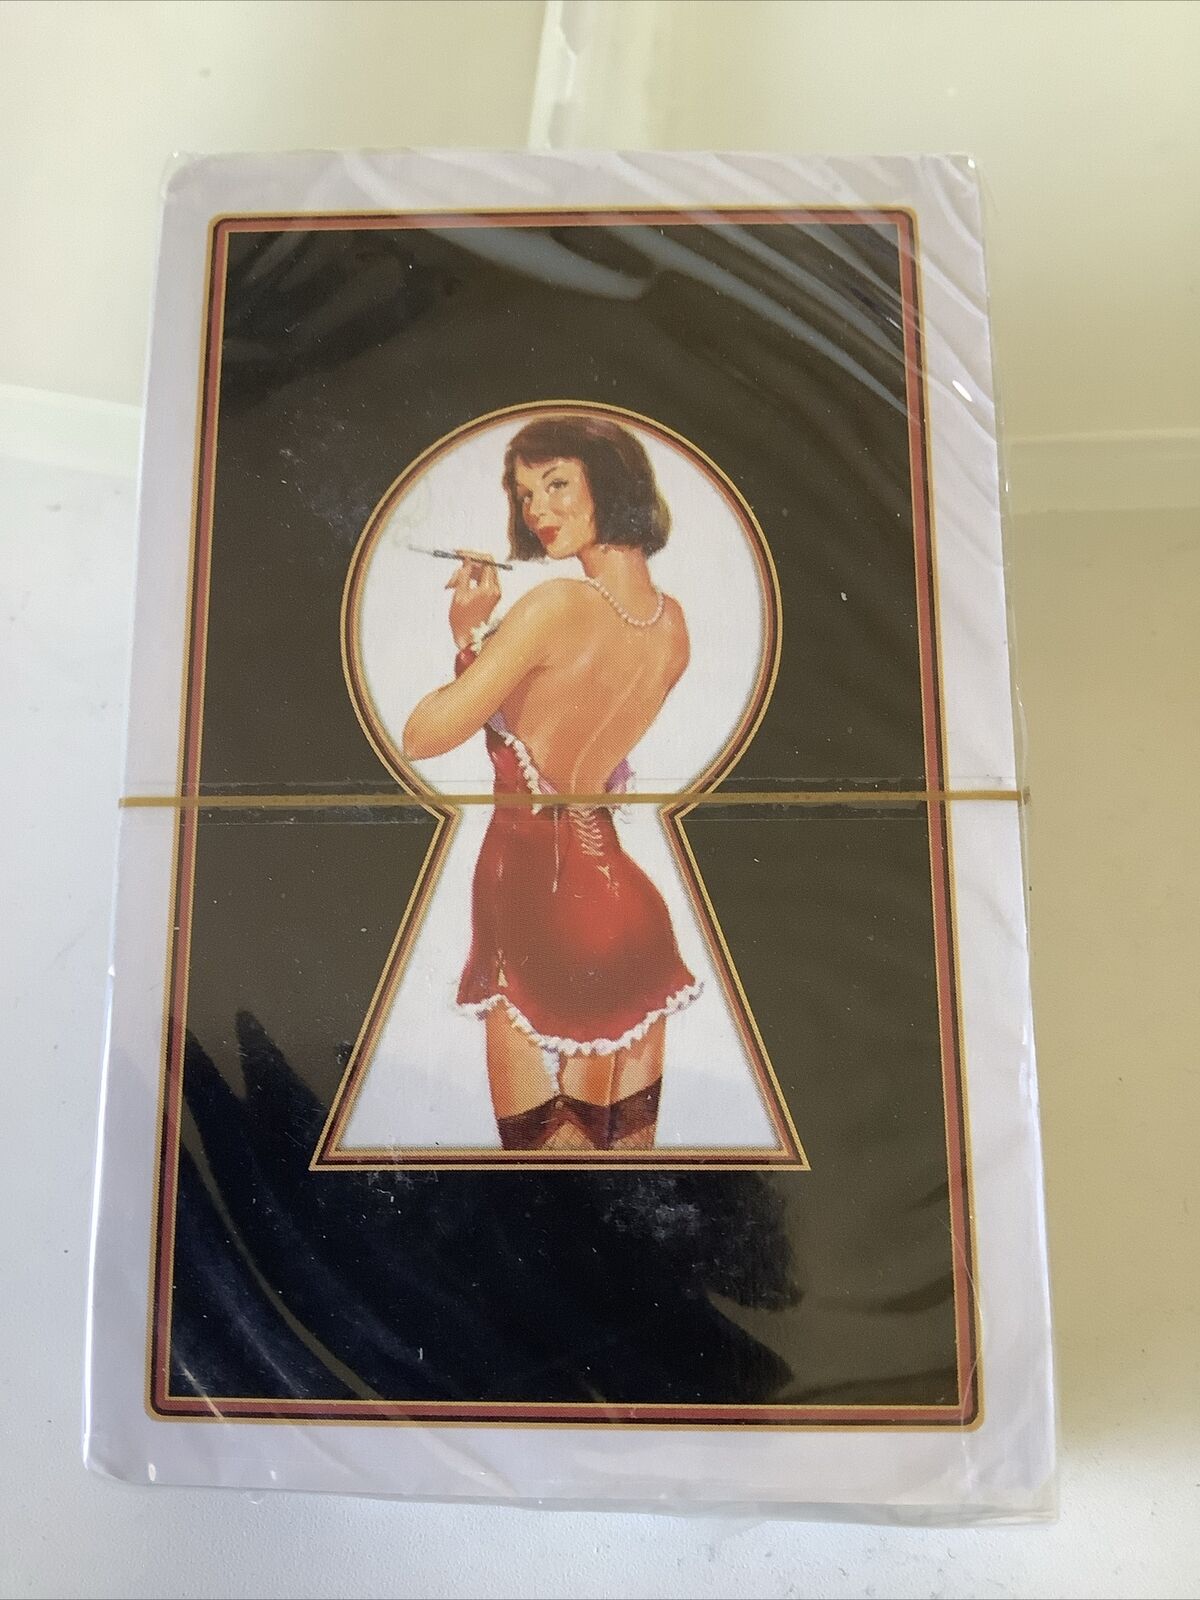 Sexy Keyhole Peeping Tom Risque Pinup Deck Playing Cards Vintage SEALED